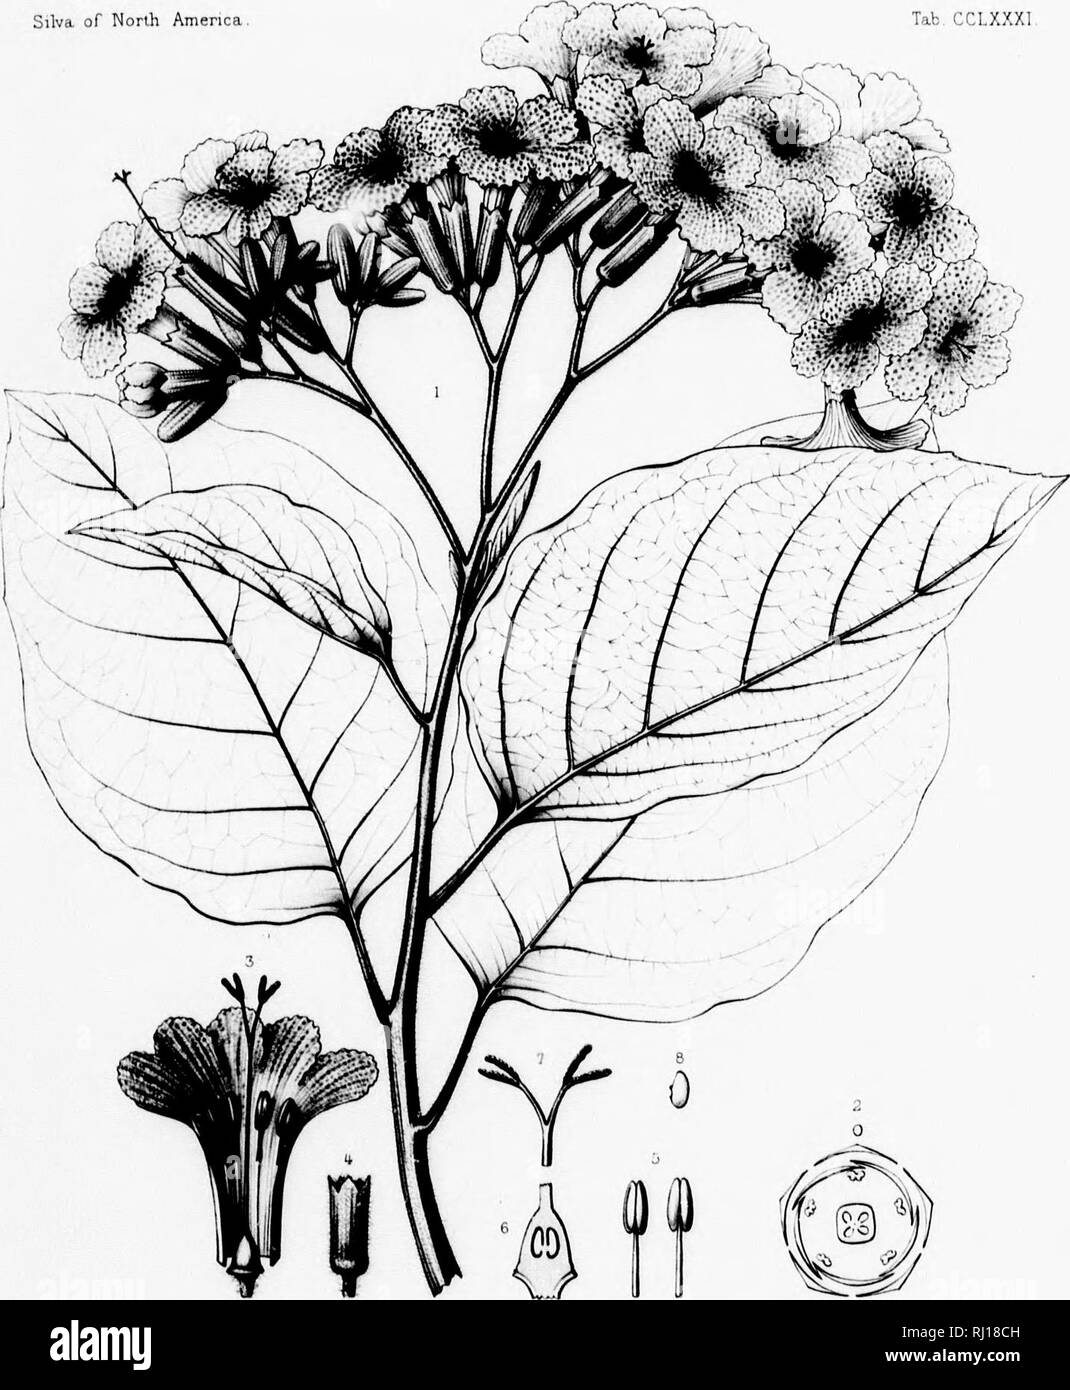 . The silva of North America [microform] : a description of the tree which grow naturally in North America exclusive of Mexico. Trees; Trees; Dicotyledons; Arbres; Arbres; Dicotylédones. iiokUAQINACEvK. osc of sdino i)f liriiufflit a« t» on luosl of the urfa'&quot;i», nninor- I Hll)ic flMjt lesi-rihcd it in iosi&gt; uarfleu iit illv )&gt;Lint« mifn^twh, Bro&lt;ra^ UHivu in Florid* i) ; planted it in Key Silva. of North America Tab, CCLXXXl.. u in. 11 {' E Fa.n^n t/r/ Io:t,t*{ sc. CORDIA SEBESTENA, L A liwff-t'u.r tii/f.f' Imp .f Taneur }tris.. Please note that these images are extracted from  Stock Photo